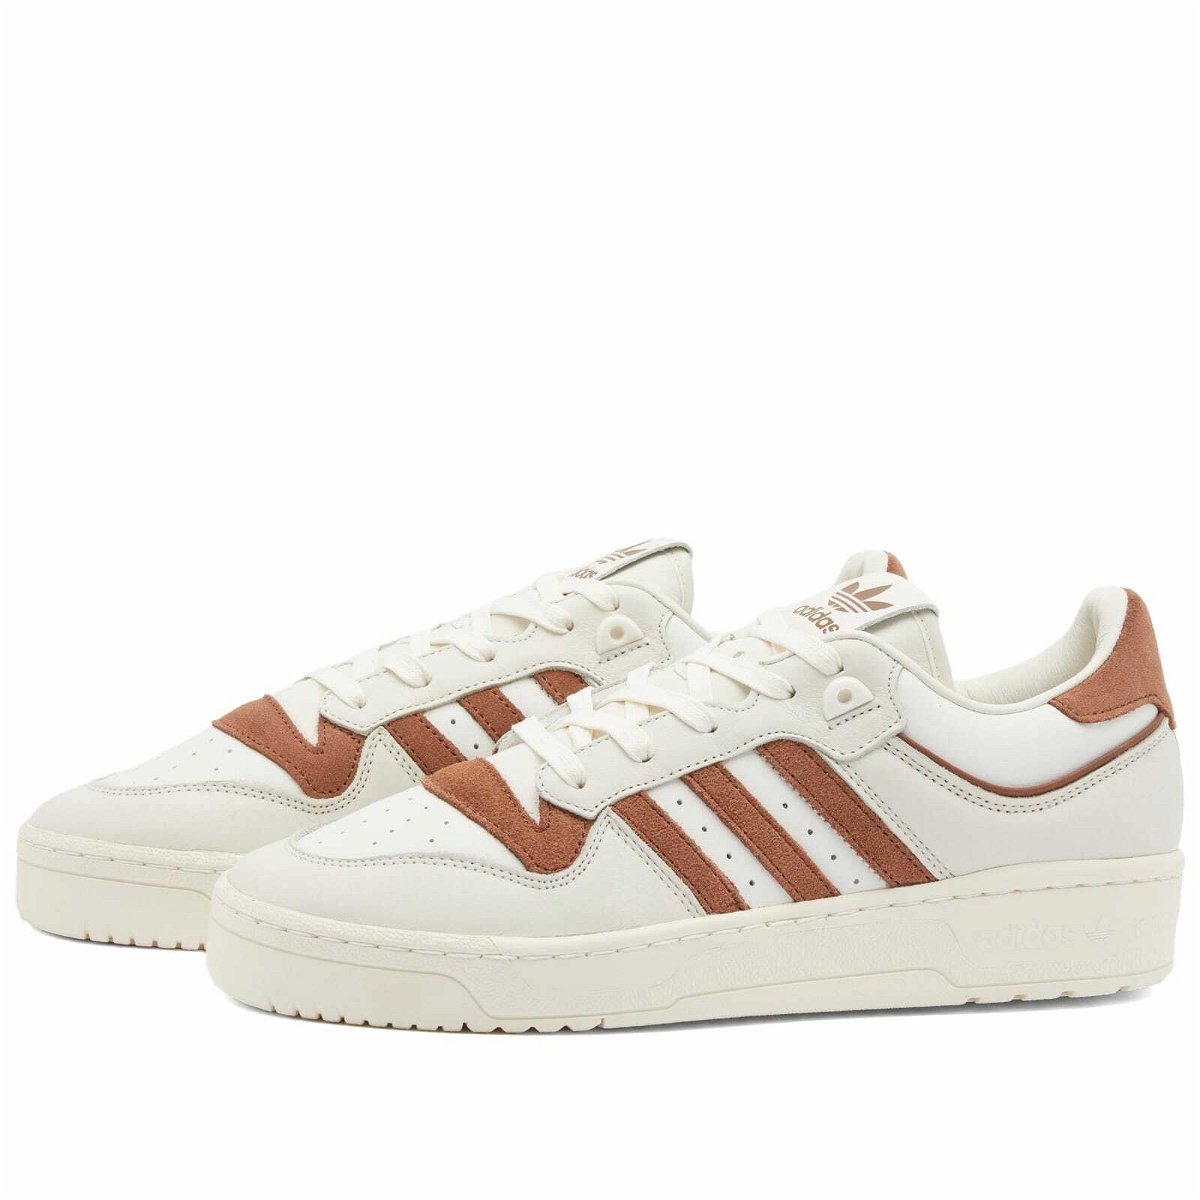 Photo: Adidas Men's Rivalry 86 Low Sneakers in Cloud White/Preloved Brown/Off White